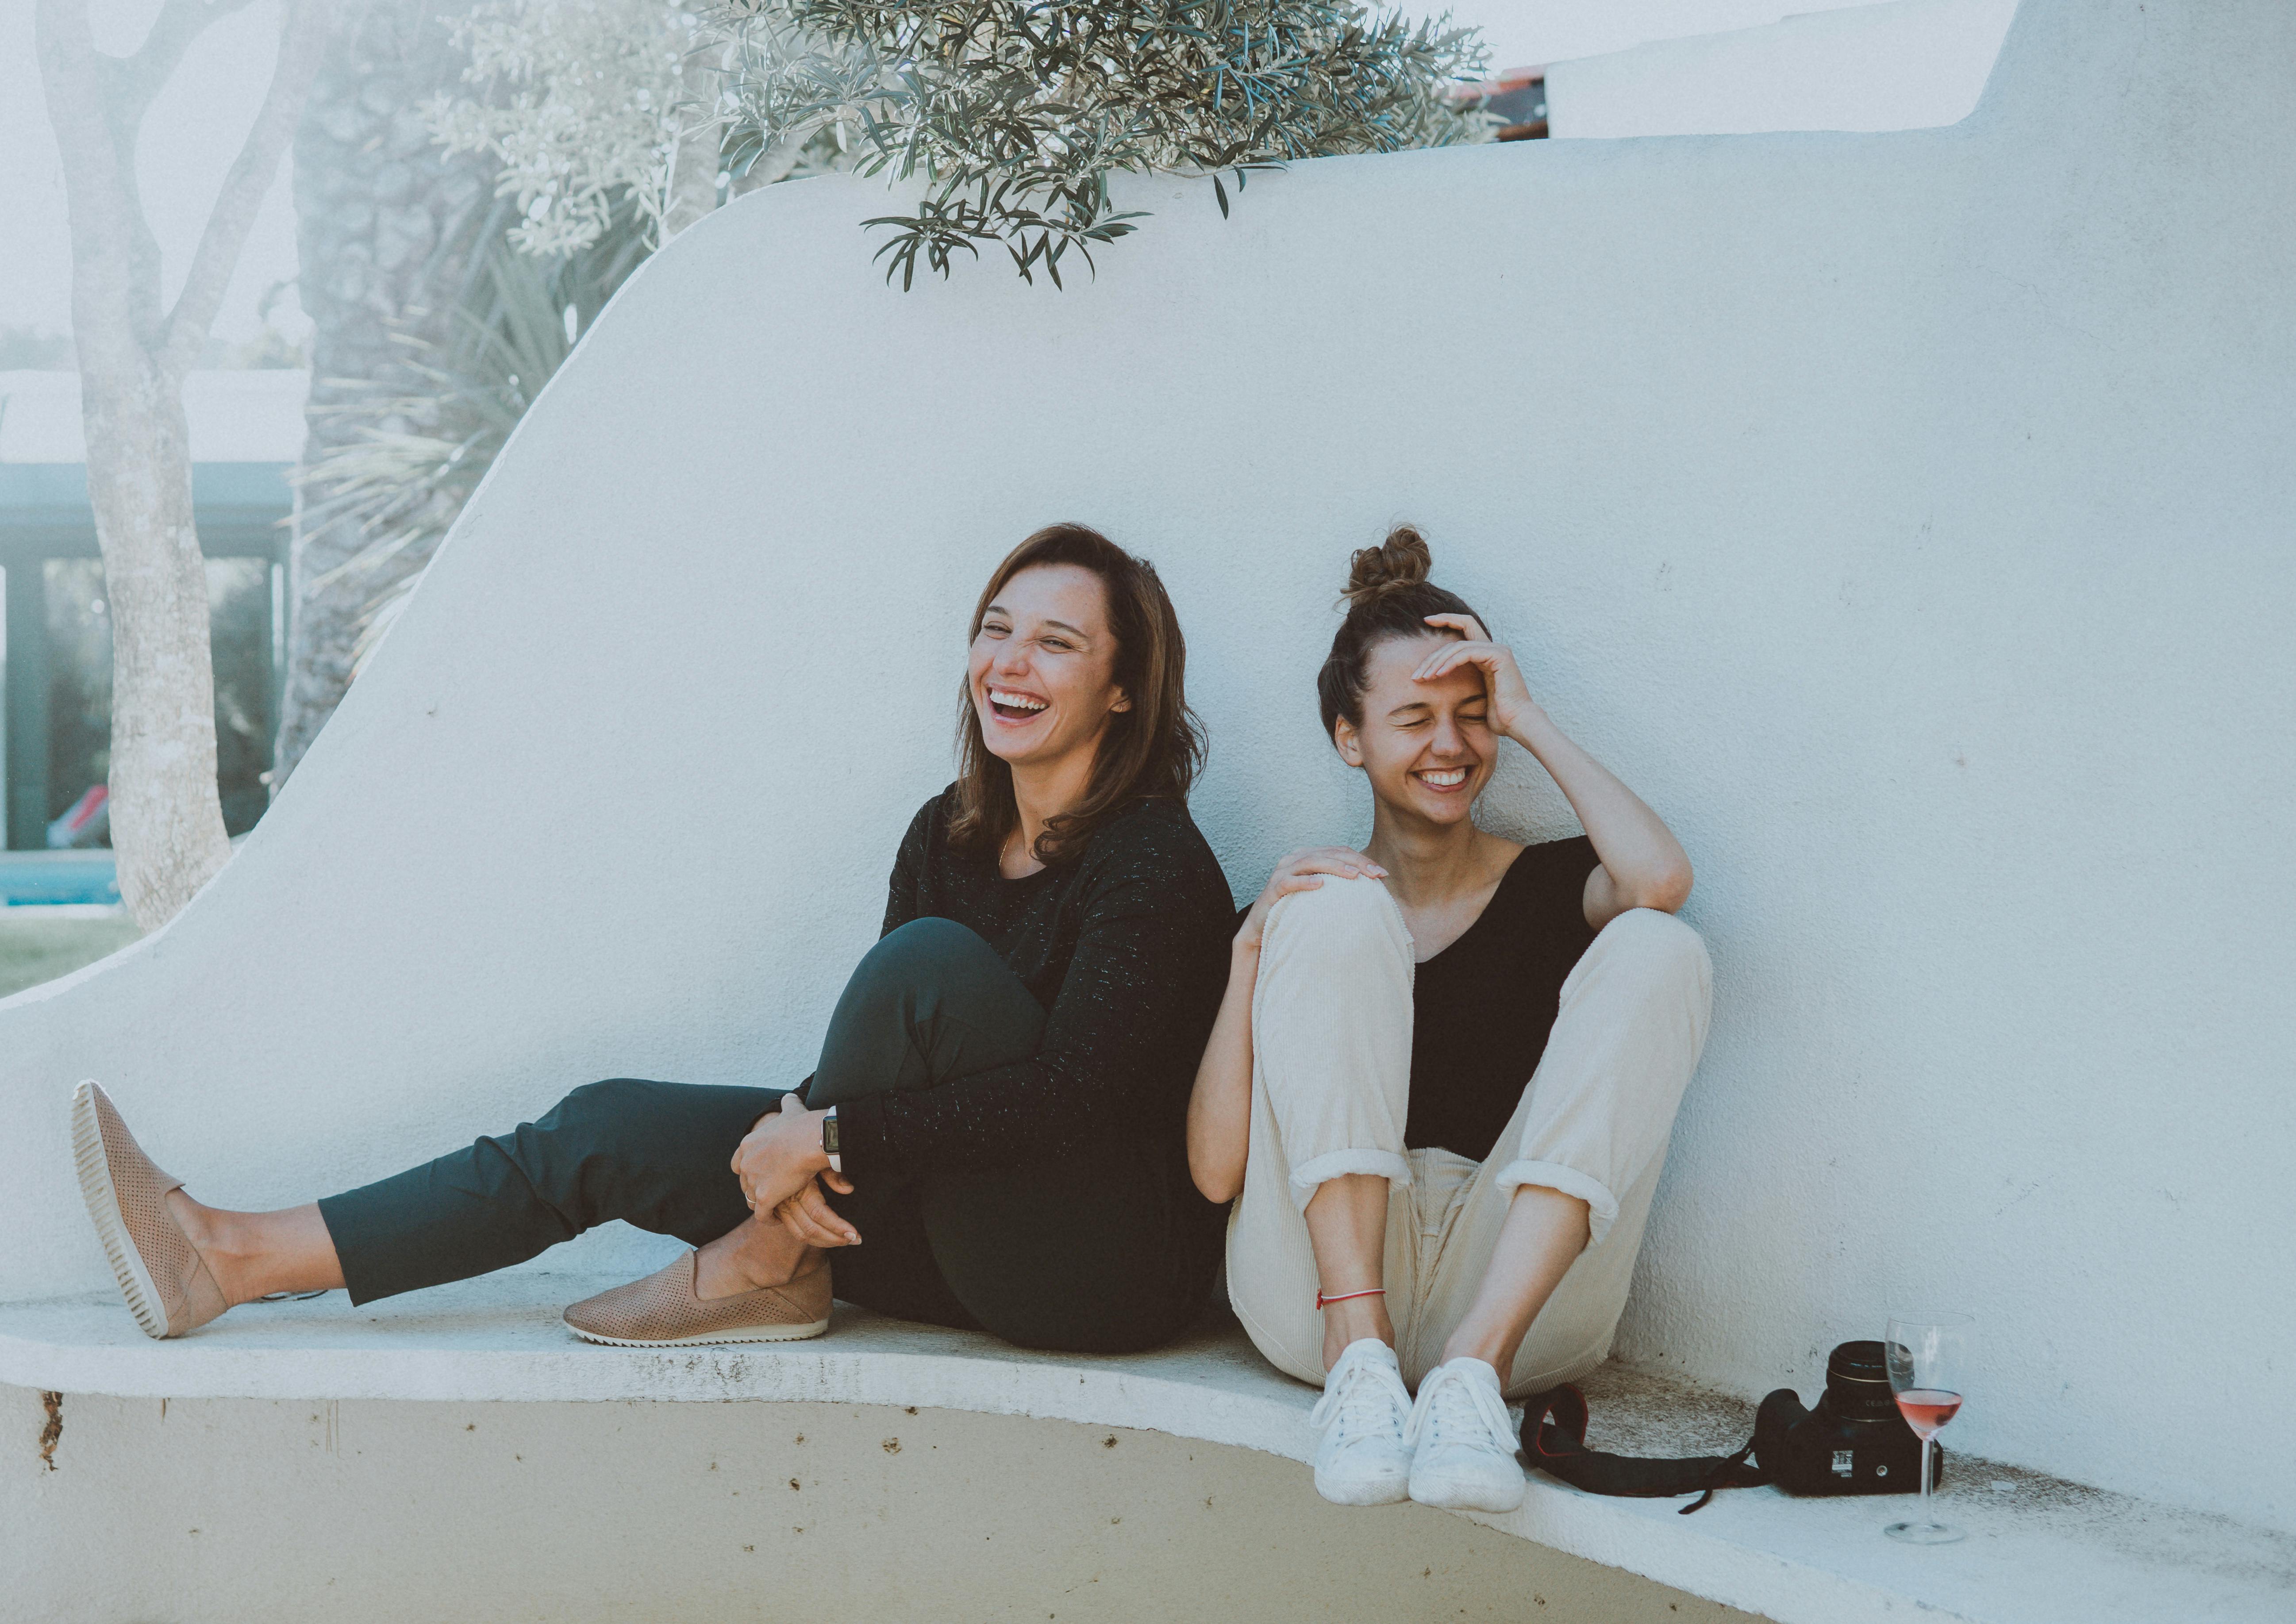 Two best friends sitting back to back and laughing | Source: Elle Hughes on Pexels